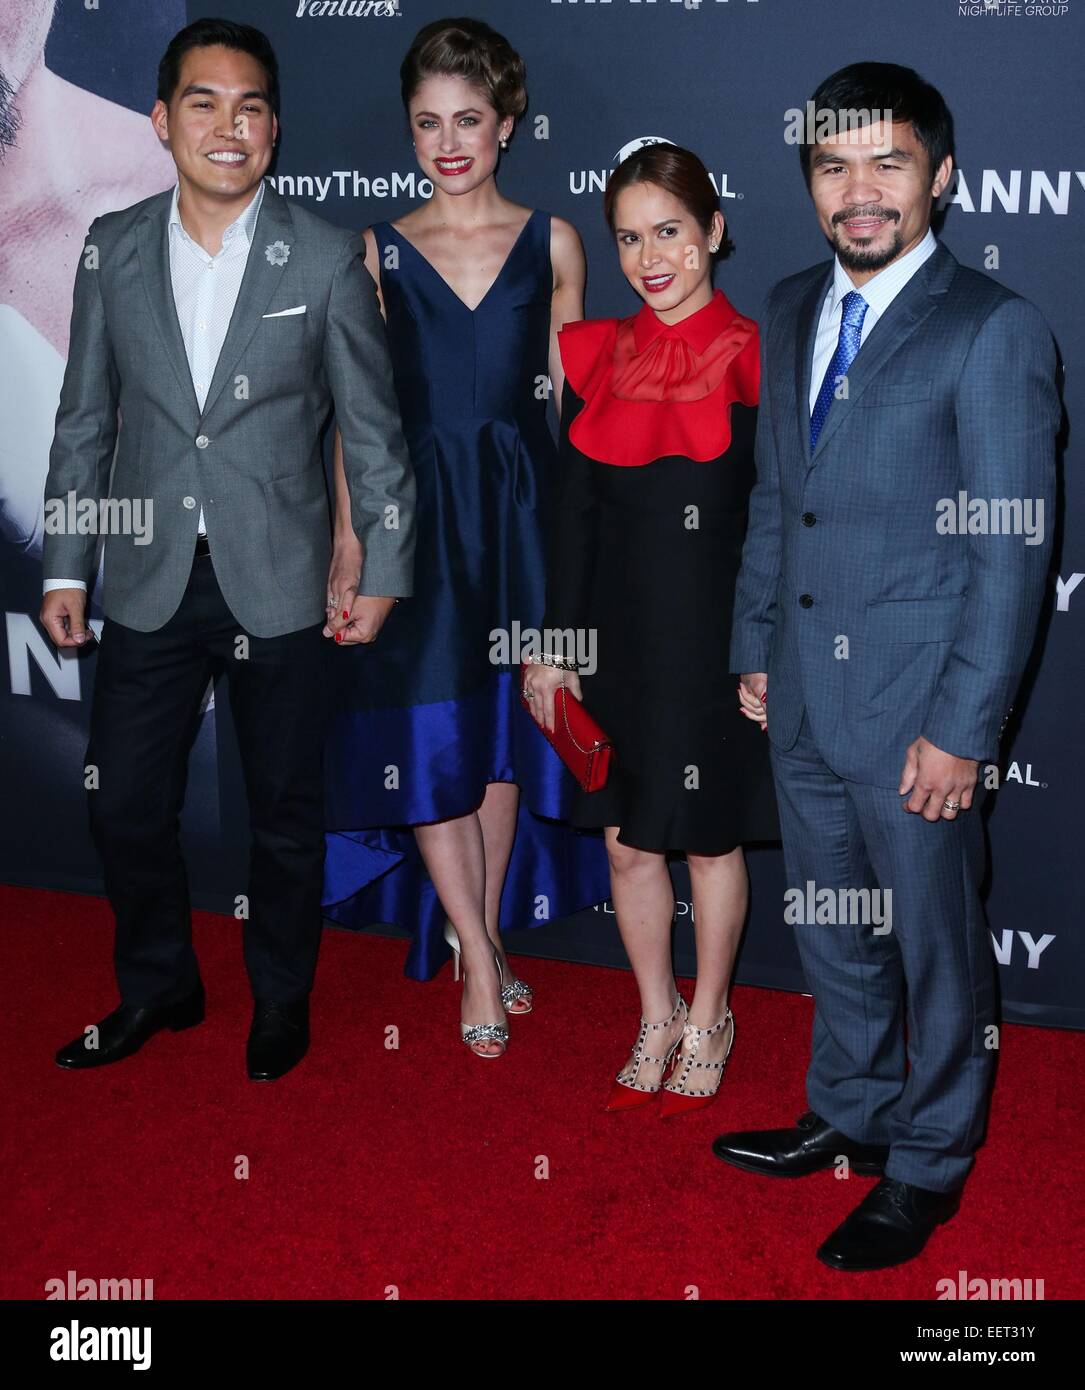 Los Angeles, California, USA. 20th Jan, 2015. Ryan Moore, Jinkee Pacquiao, Manny Pacquiao at arrivals for MANNY Premiere, TCL Chinese 6 Theatres (formerly Grauman's), Los Angeles, CA January 20, 2015. Credit:  Xavier Collin/Everett Collection/Alamy Live News Stock Photo